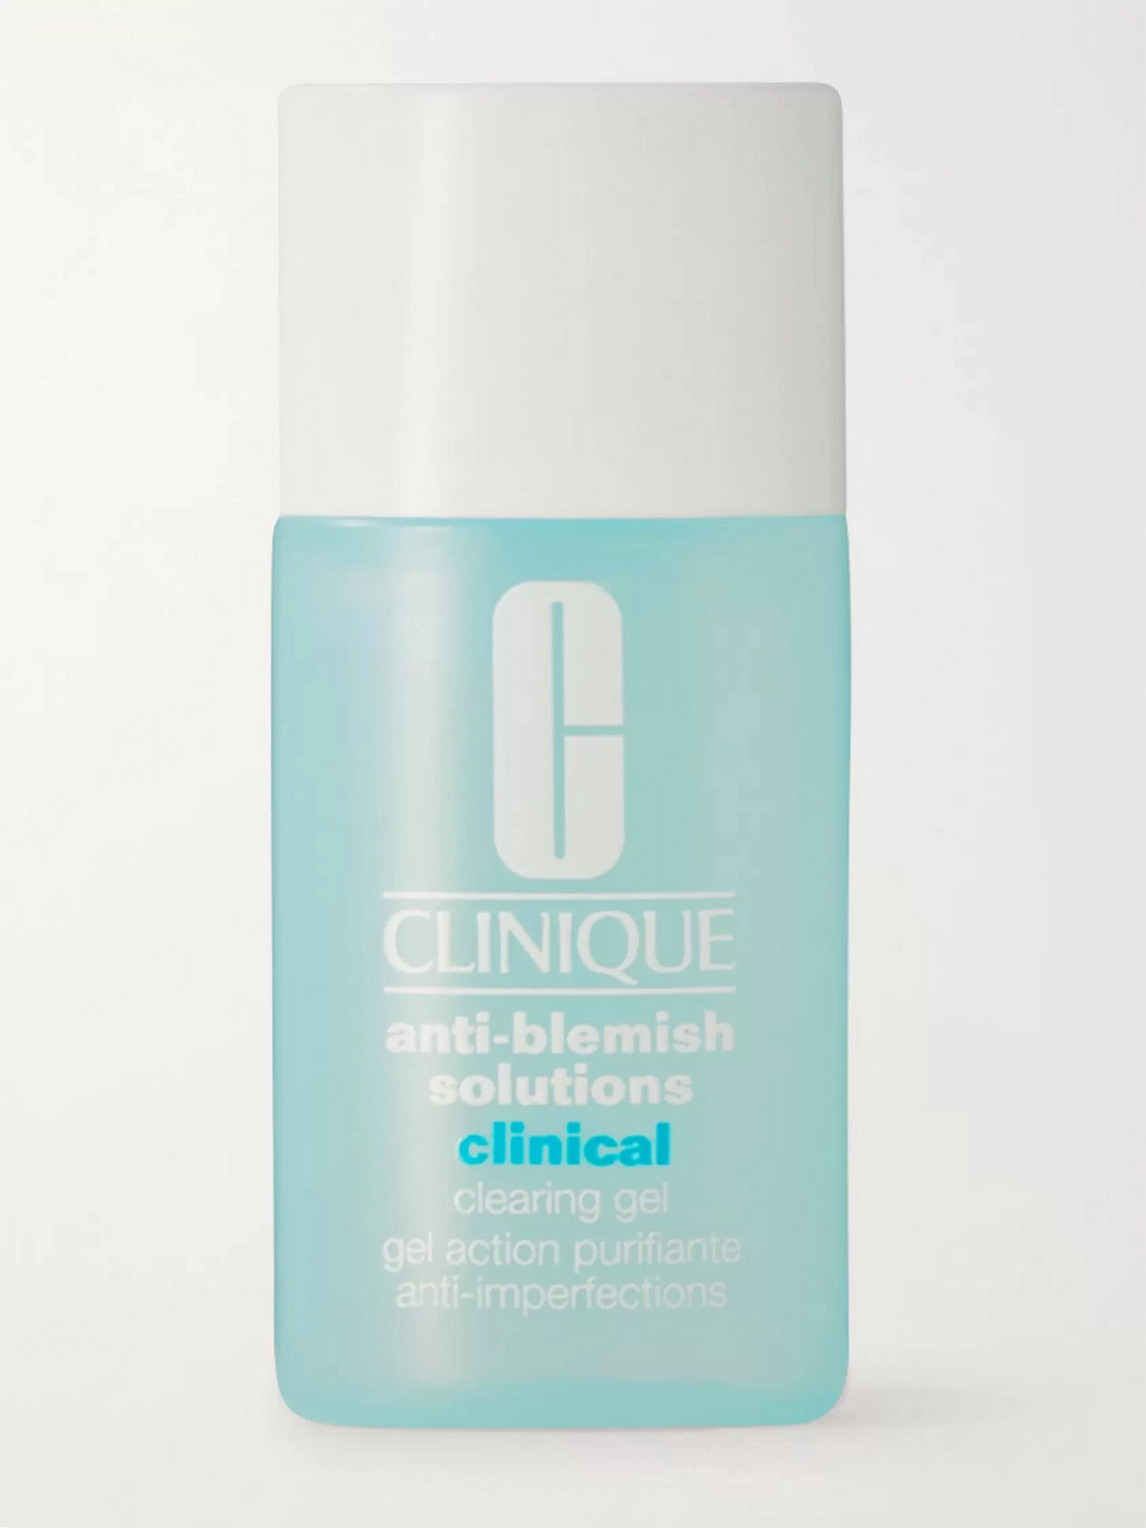 Clinique Anti-blemish Solutions Clinical Clearing Gel, 15ml In Colorless